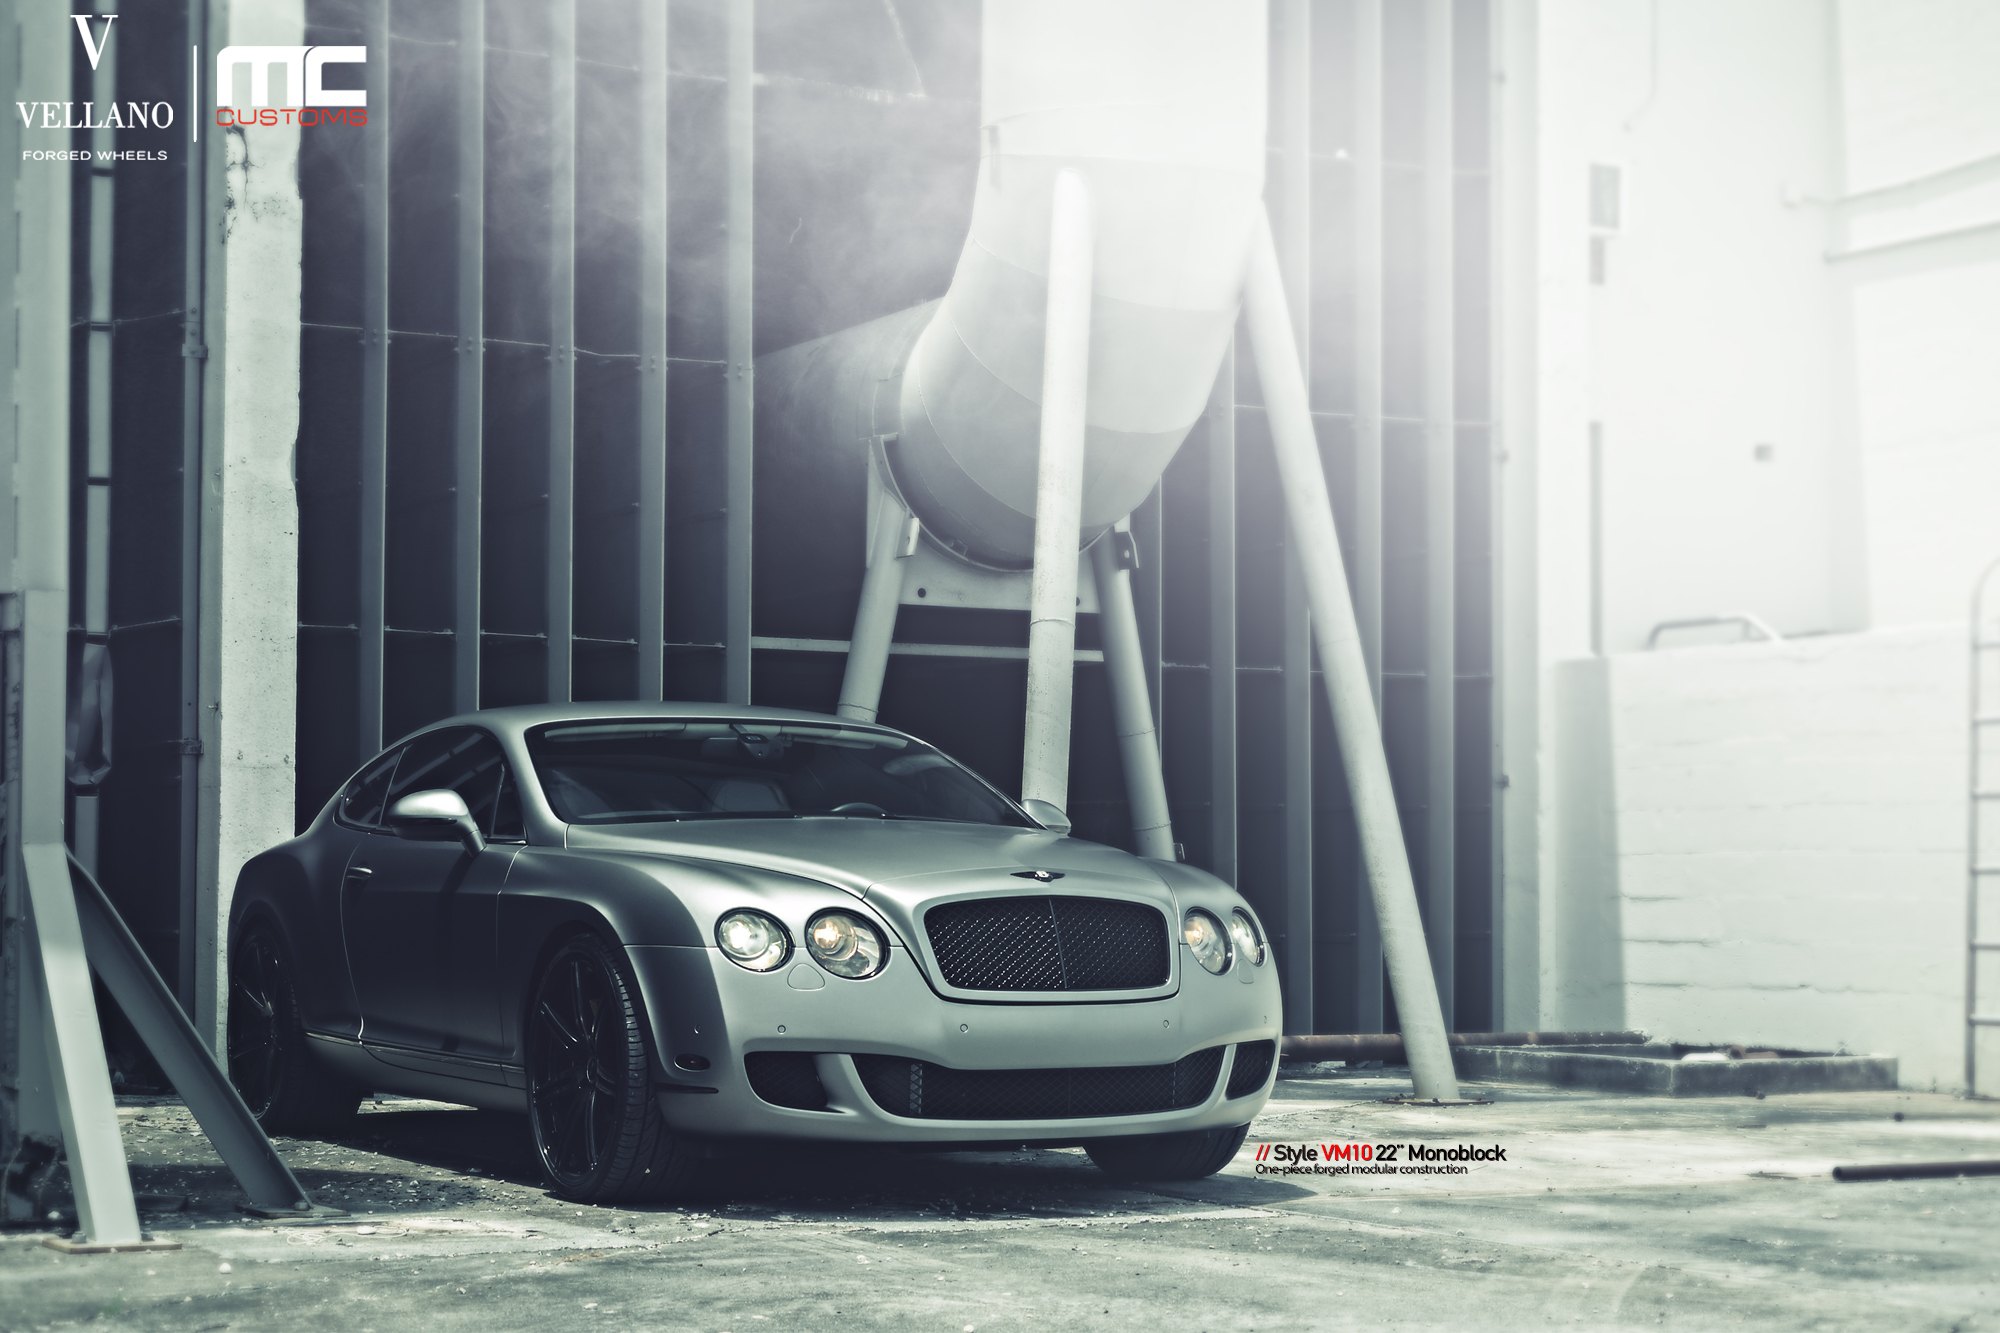 Gray Bentley Continental with Blacked Out Mesh Grille - Photo by Vellano